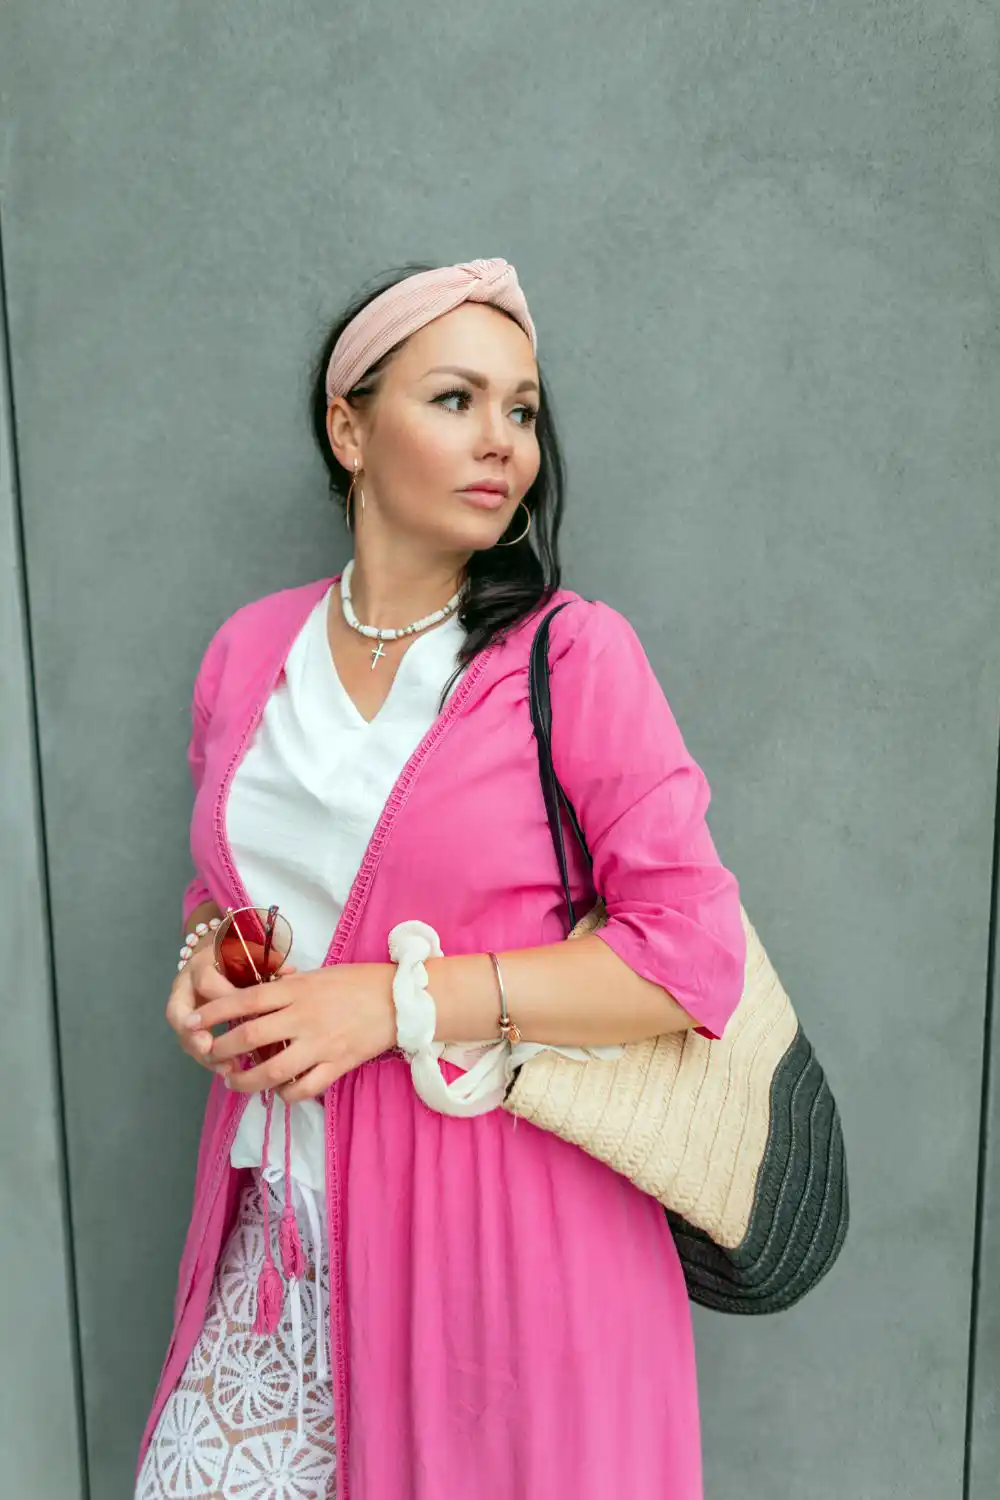 Fashionable Woman with a Headband in a Stylish Pink Pareo